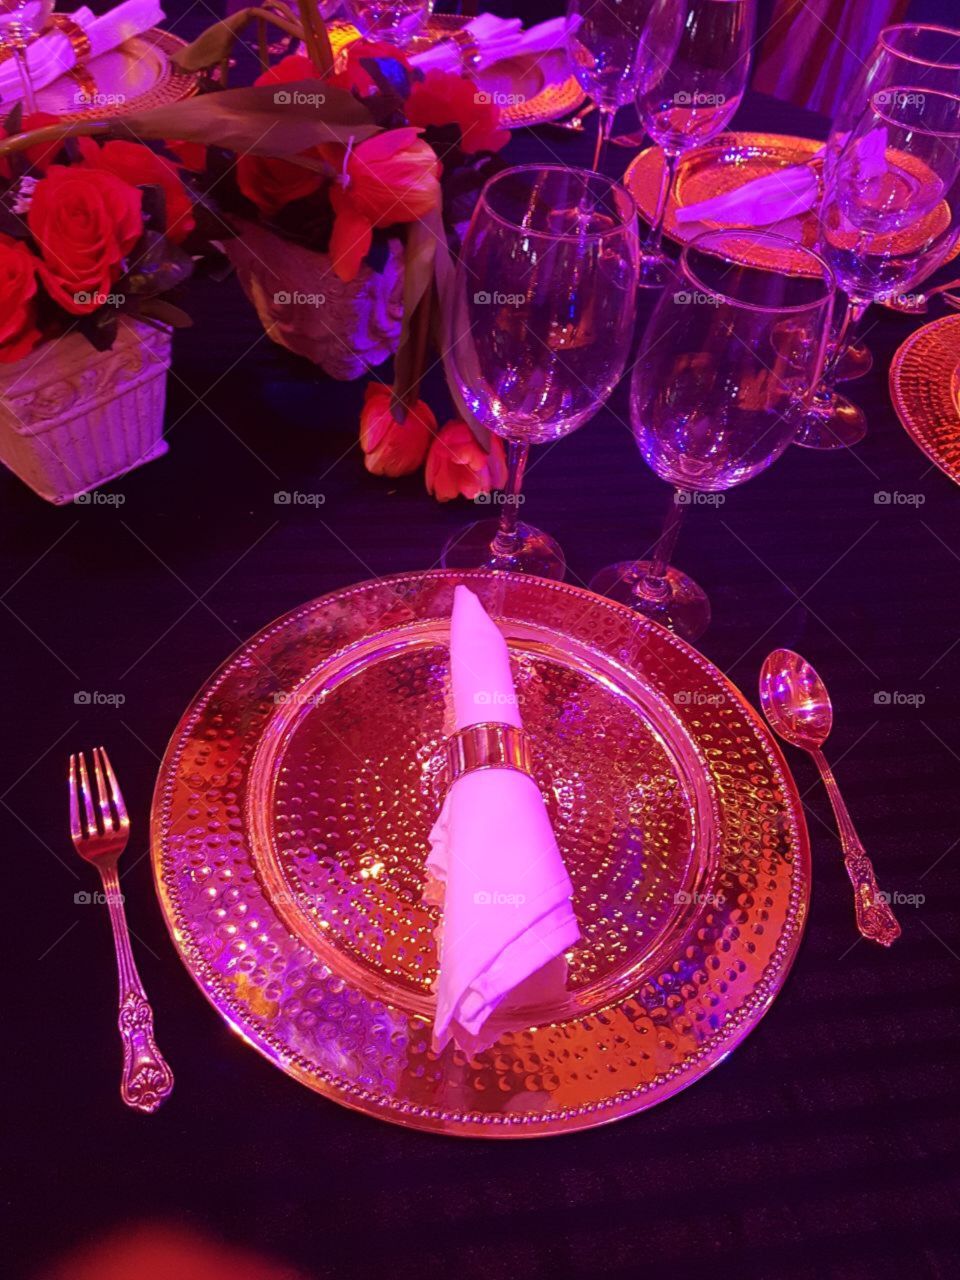 royal golden plate spoon and glass arrangements on dining table